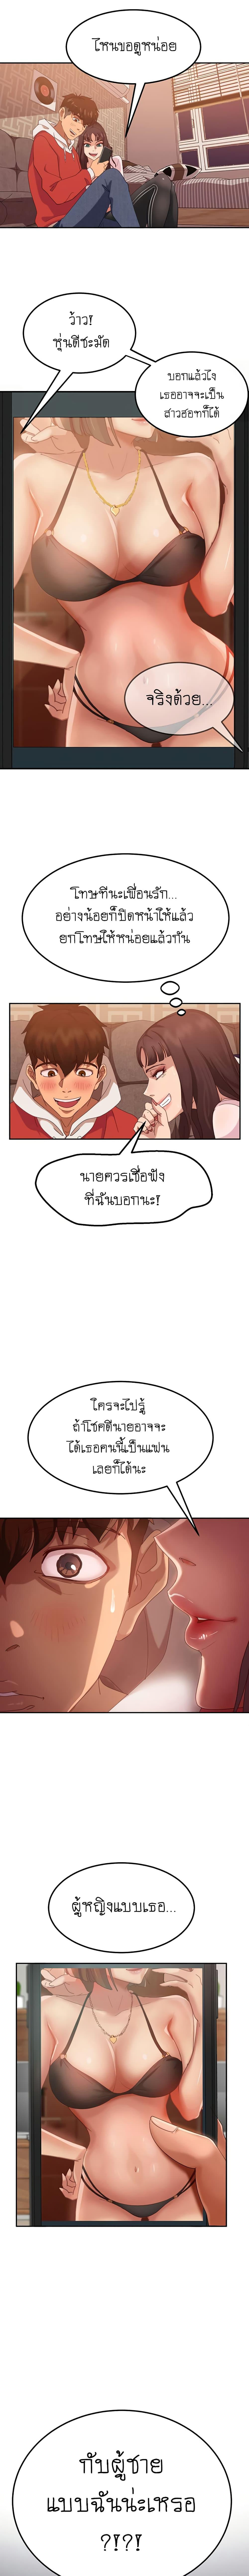 A Twisted Day 2 ภาพ 8